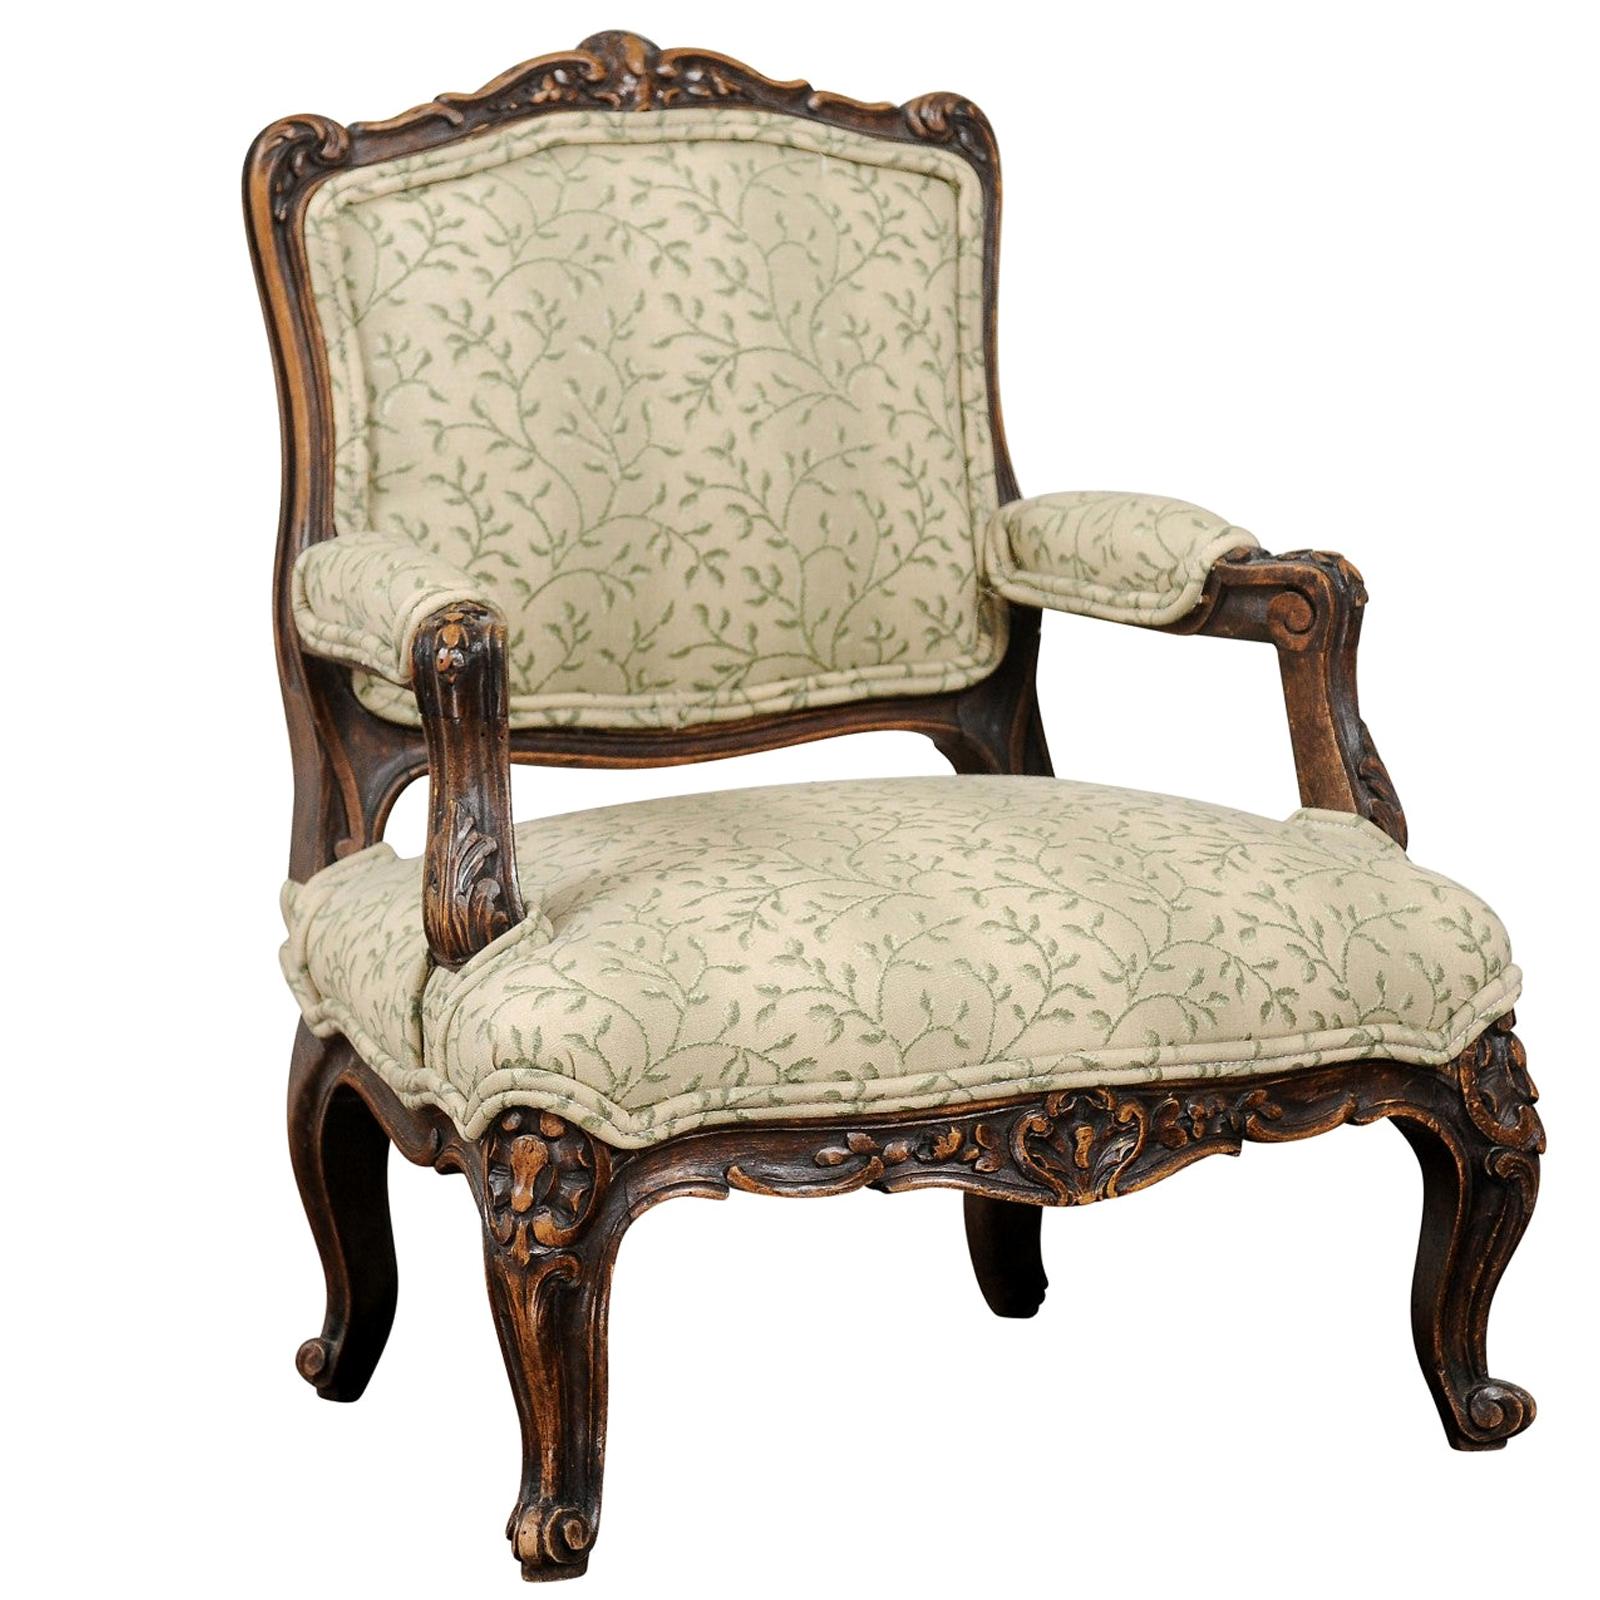 French 1750s Louis XV Period Carved Apprentice Chair with Foliage Upholstery